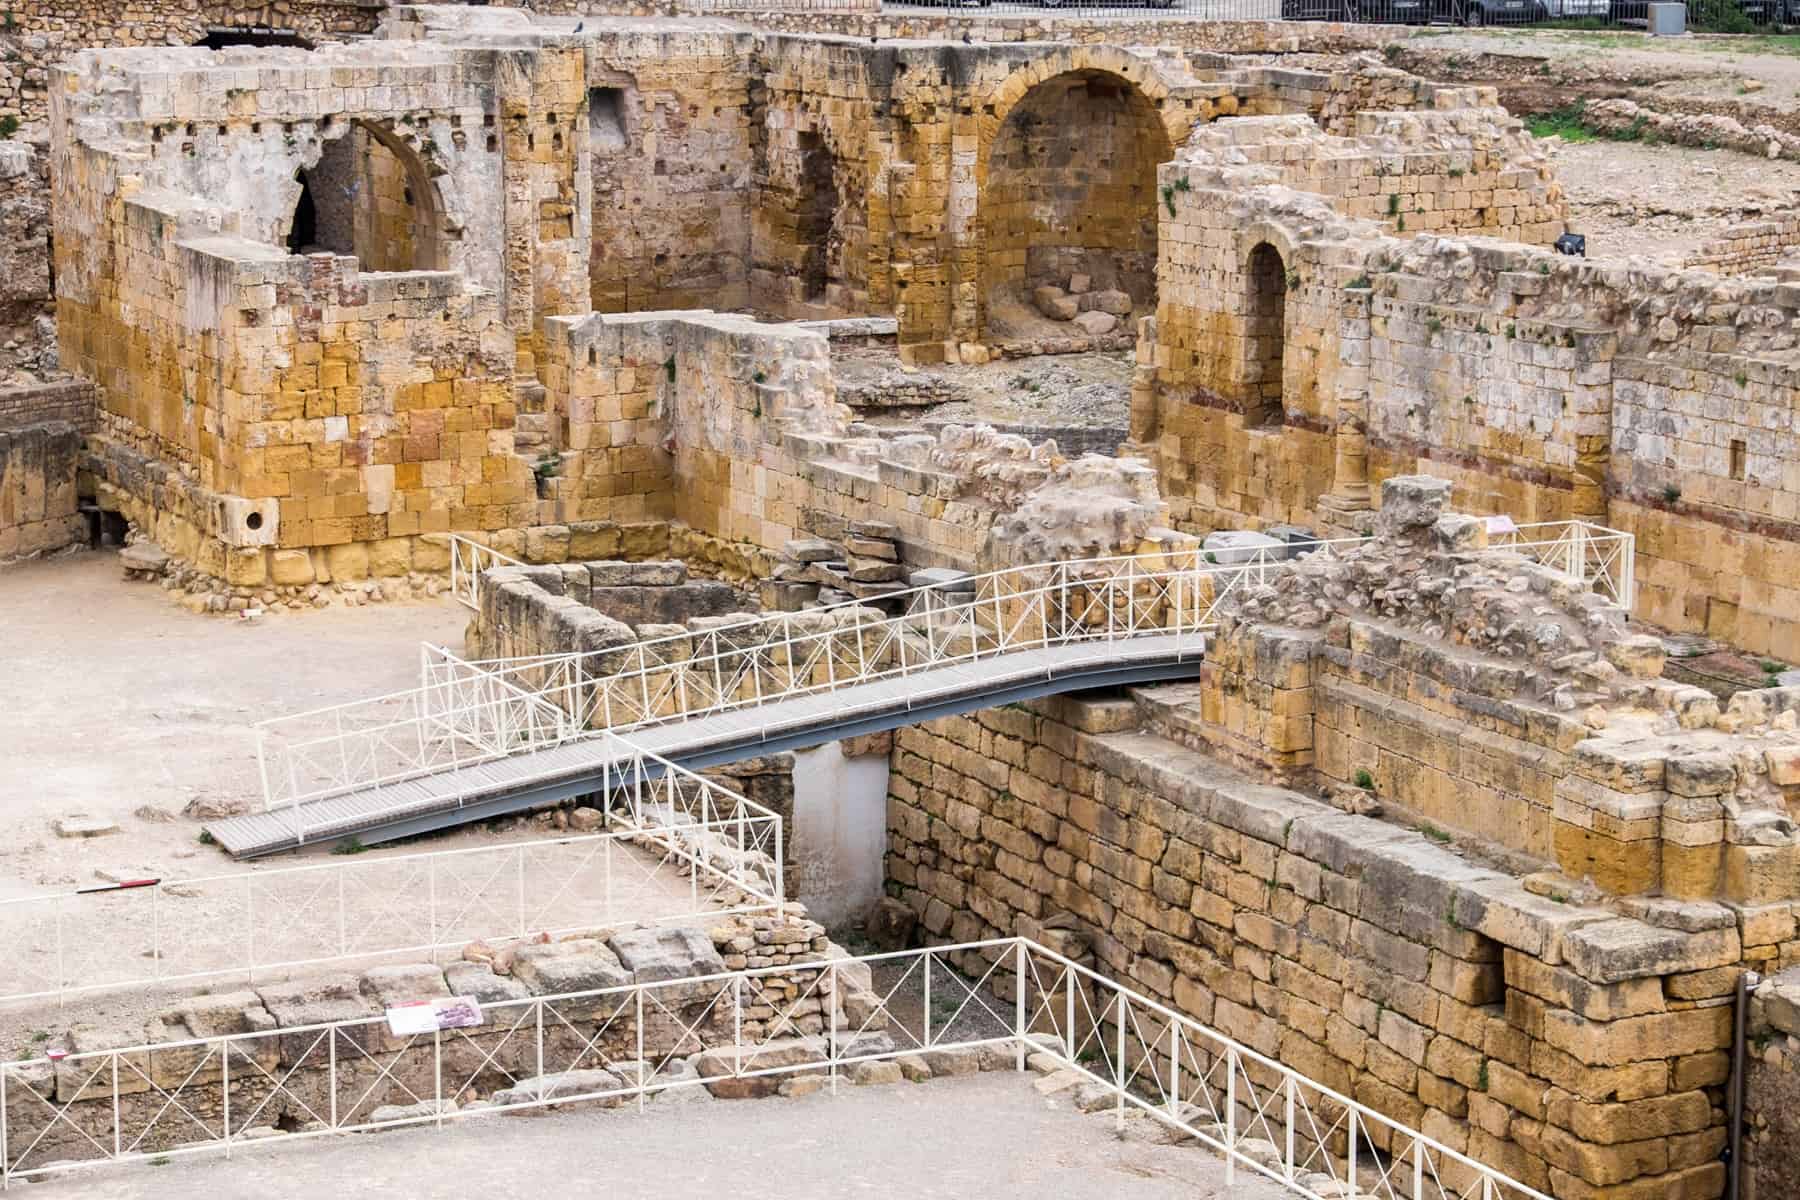 Worn yellow and grey stones of the walls, archways and underground chambers of the Roman Tarragona Amphitheatre 